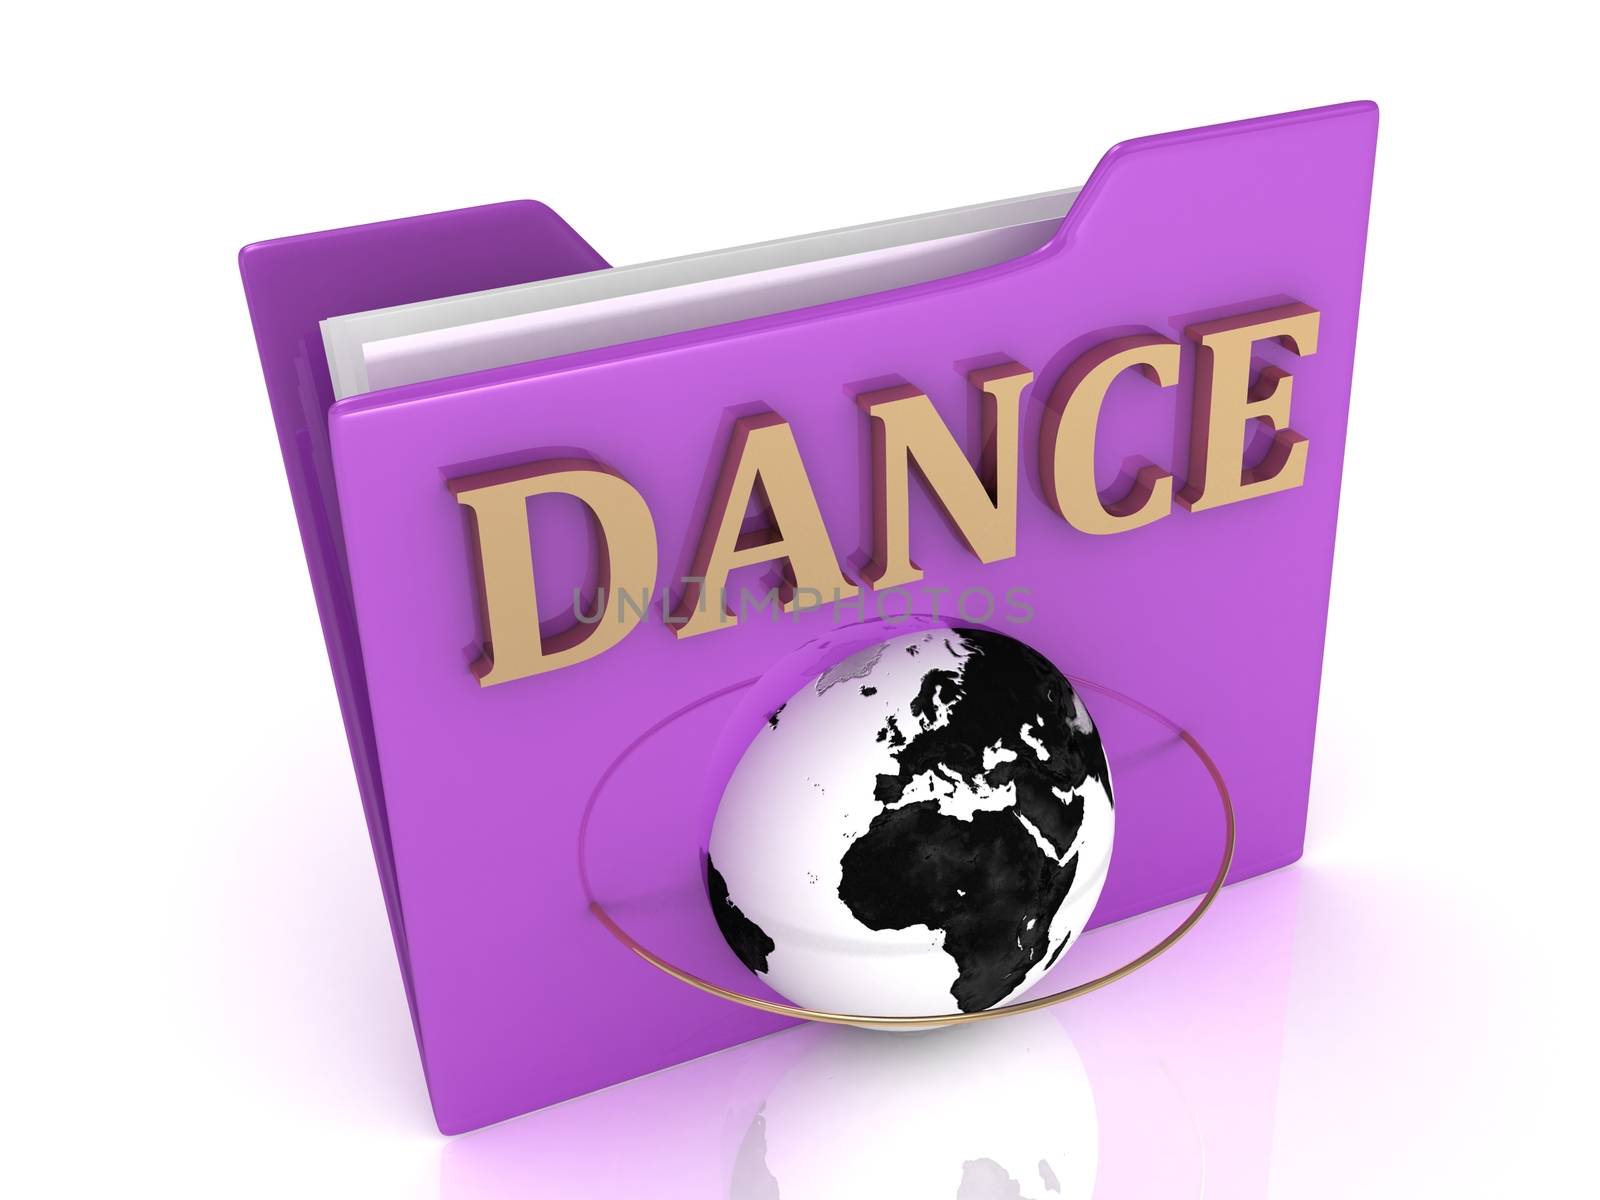 DANCE bright gold letters on a lilac folder by GreenMost